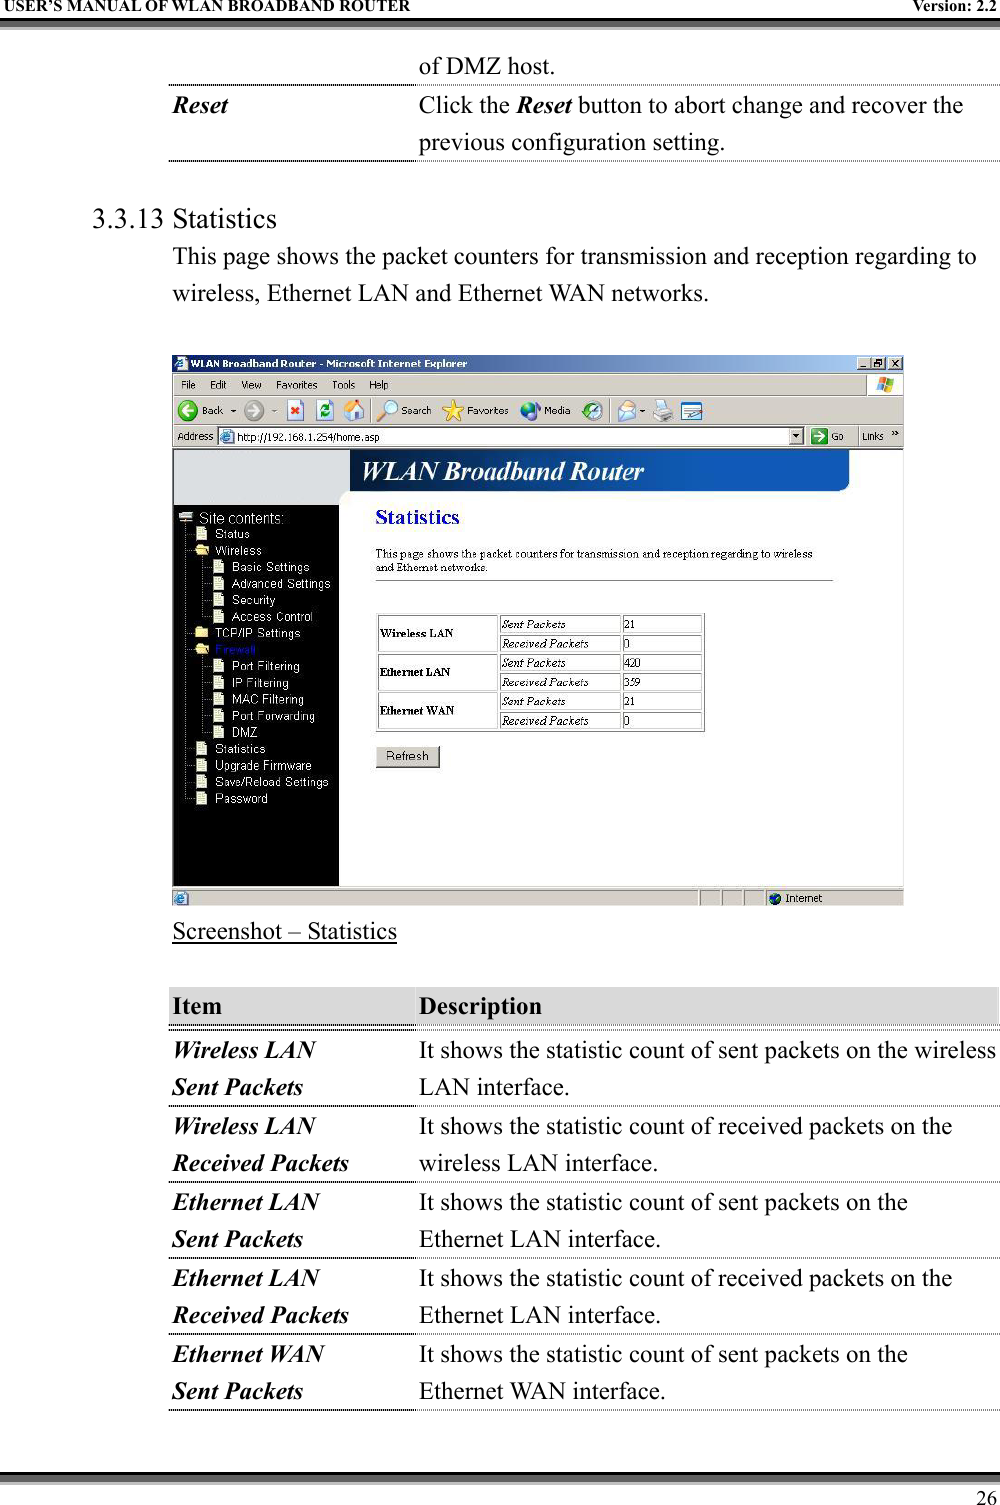   USER’S MANUAL OF WLAN BROADBAND ROUTER    Version: 2.2     26 of DMZ host. Reset  Click the Reset button to abort change and recover the previous configuration setting.  3.3.13 Statistics This page shows the packet counters for transmission and reception regarding to wireless, Ethernet LAN and Ethernet WAN networks.   Screenshot – Statistics  Item  Description   Wireless LAN Sent Packets It shows the statistic count of sent packets on the wireless LAN interface. Wireless LAN Received Packets It shows the statistic count of received packets on the wireless LAN interface. Ethernet LAN Sent Packets It shows the statistic count of sent packets on the Ethernet LAN interface. Ethernet LAN Received Packets It shows the statistic count of received packets on the Ethernet LAN interface. Ethernet WAN Sent Packets It shows the statistic count of sent packets on the Ethernet WAN interface. 